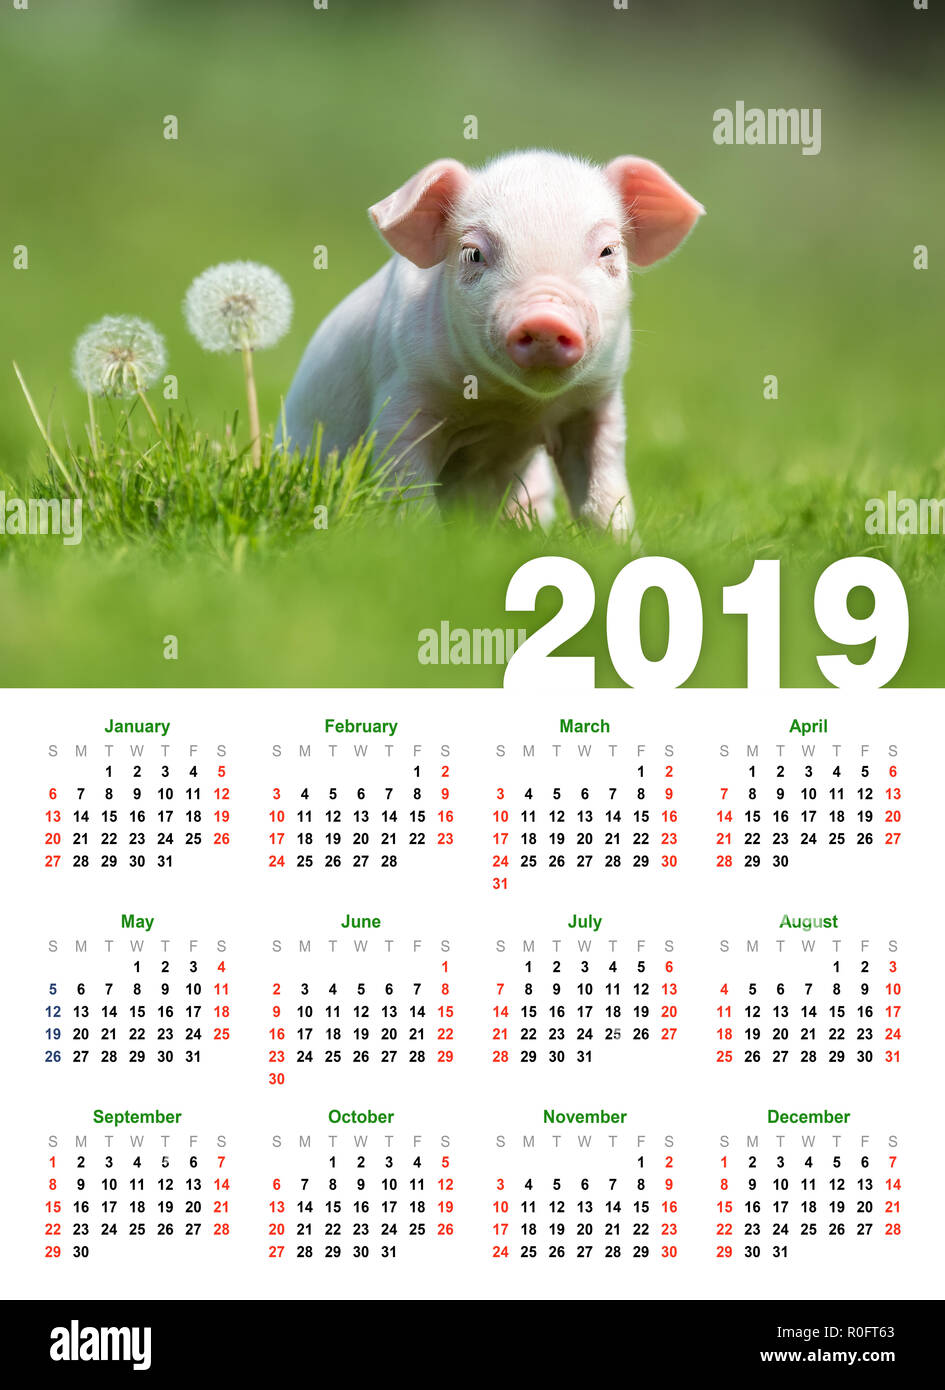 Baby funny piglet in grass. Calendar 2019 year Stock Photo